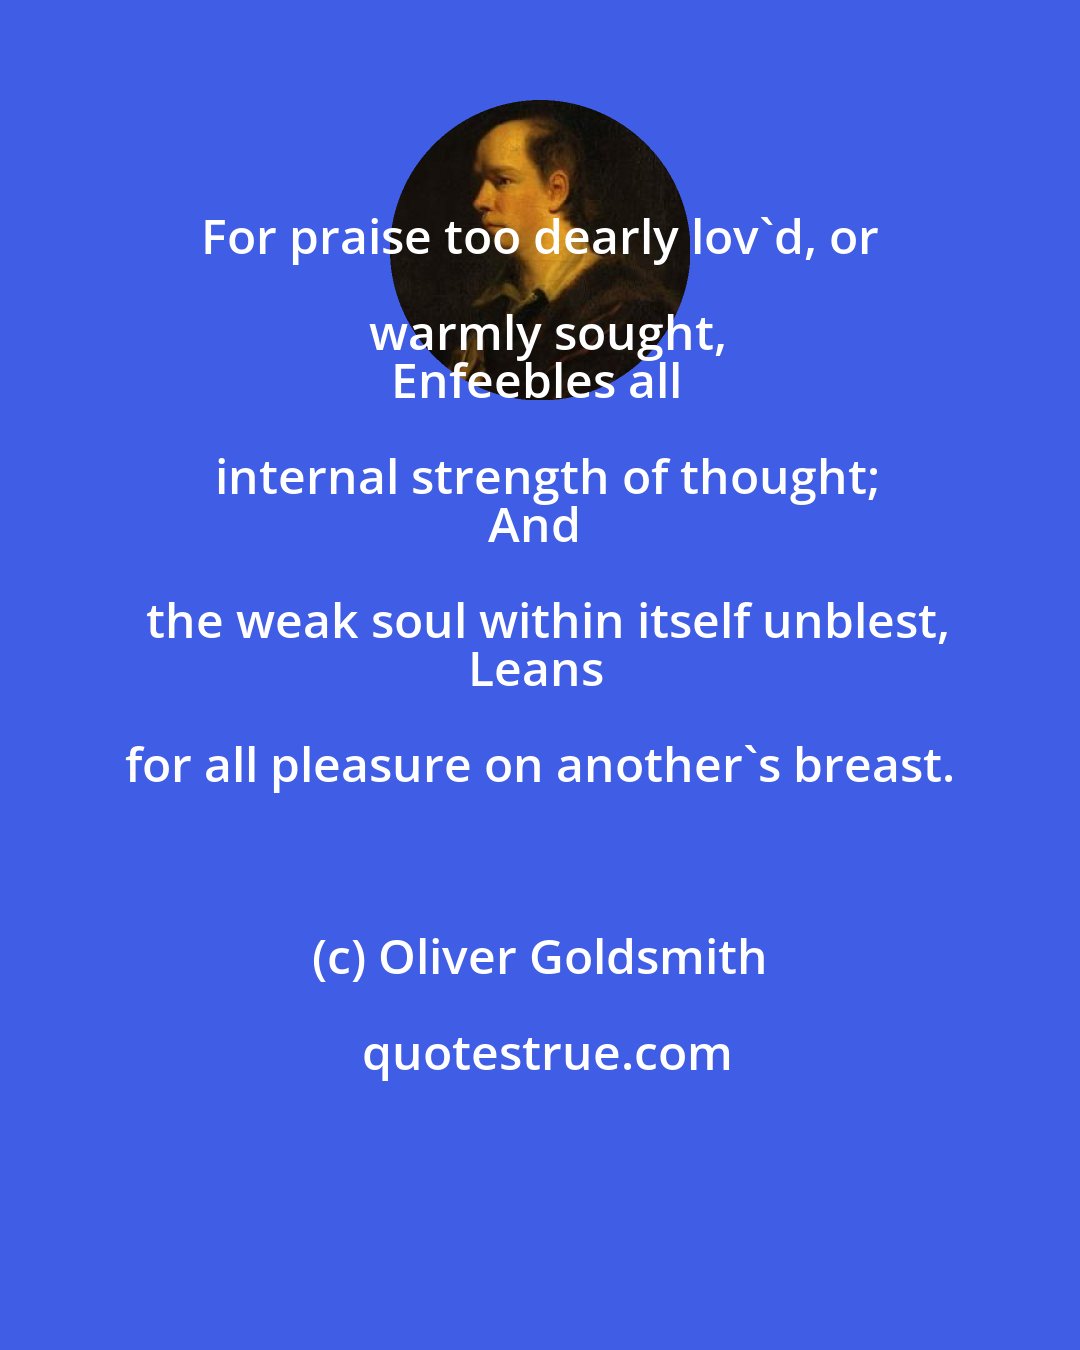 Oliver Goldsmith: For praise too dearly lov'd, or warmly sought,
Enfeebles all internal strength of thought;
And the weak soul within itself unblest,
Leans for all pleasure on another's breast.